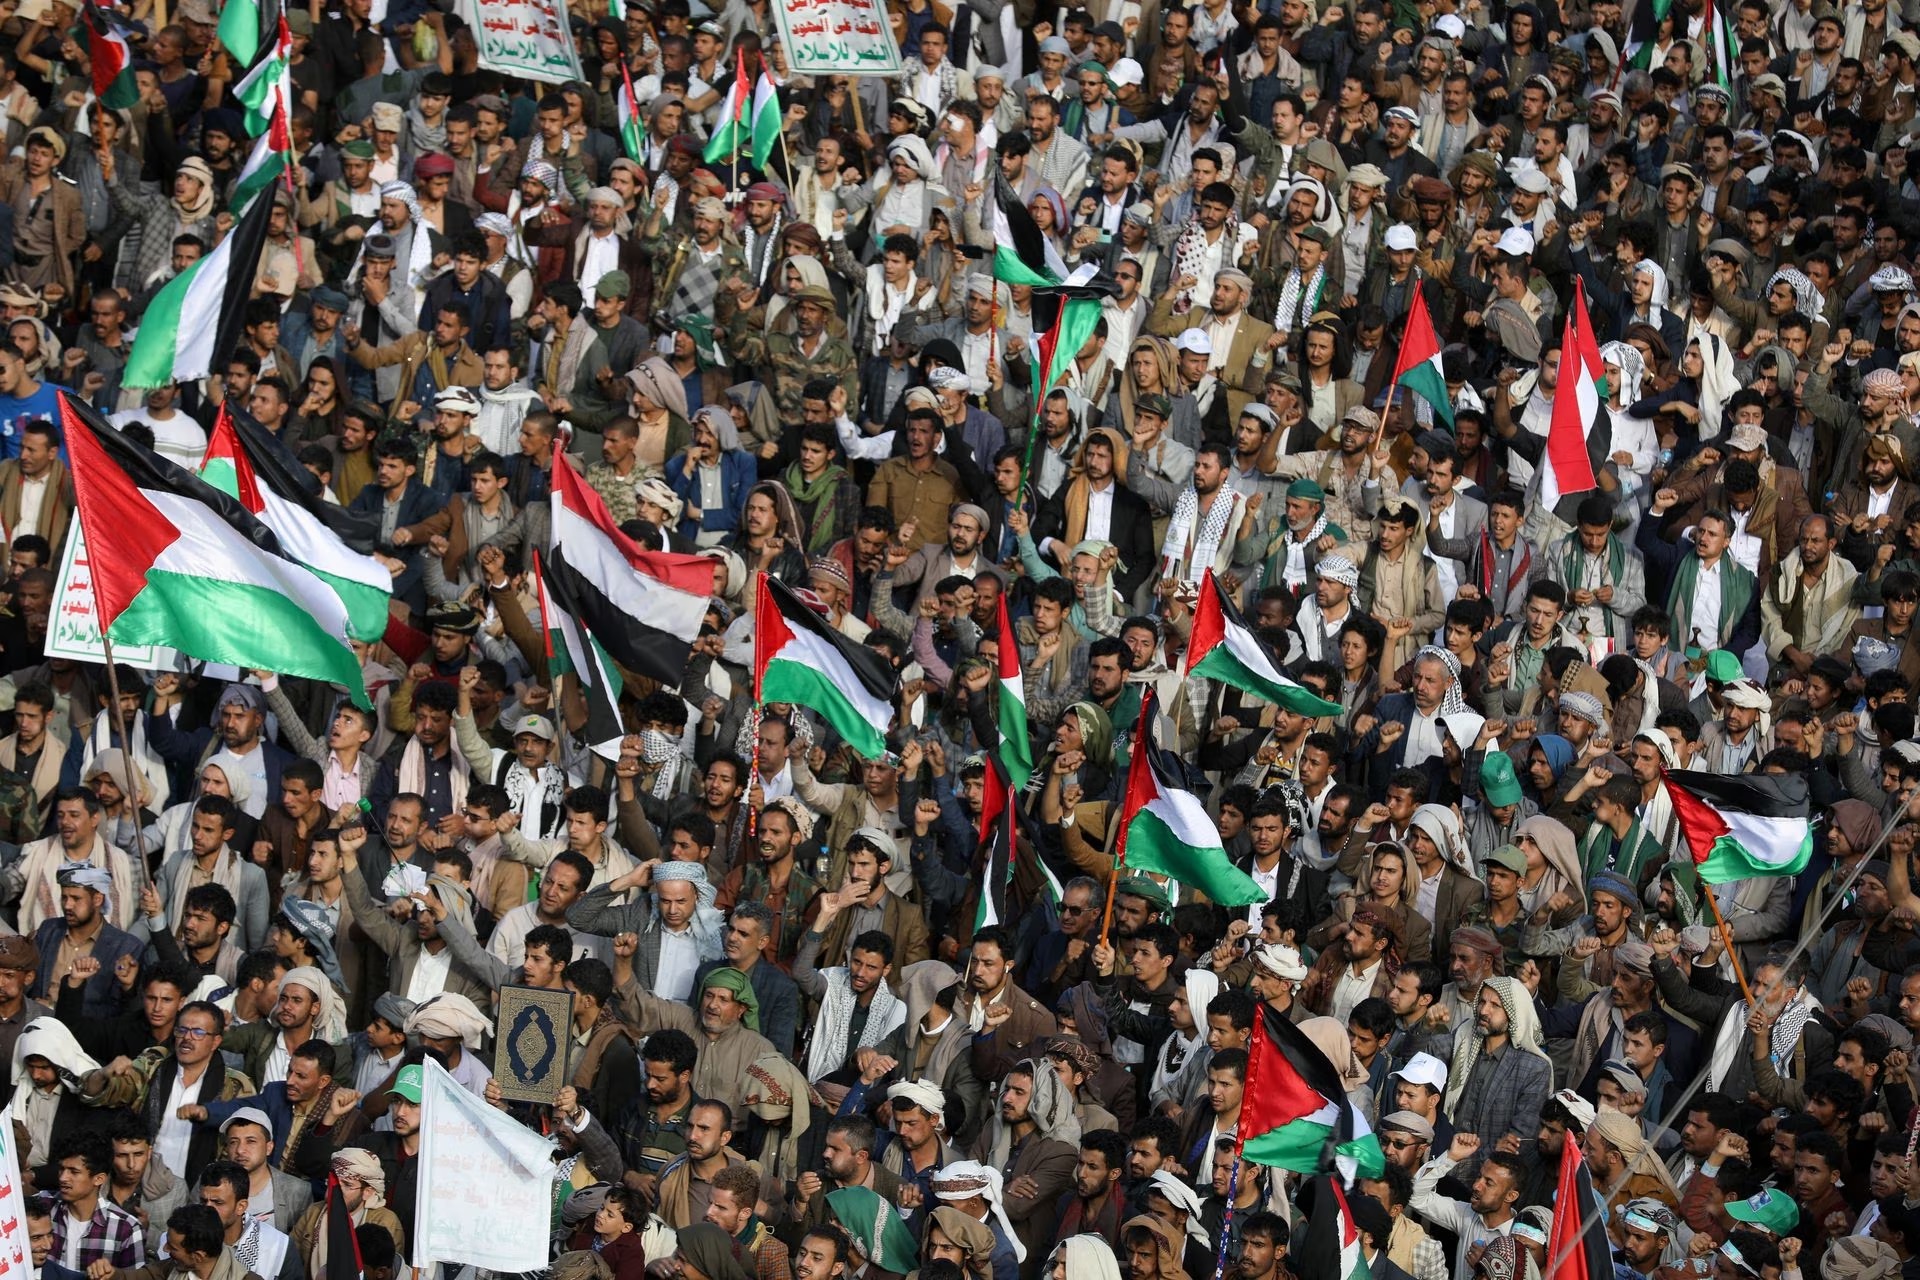 People protest in support of Palestinians in Sanaa, Yemen October 18.